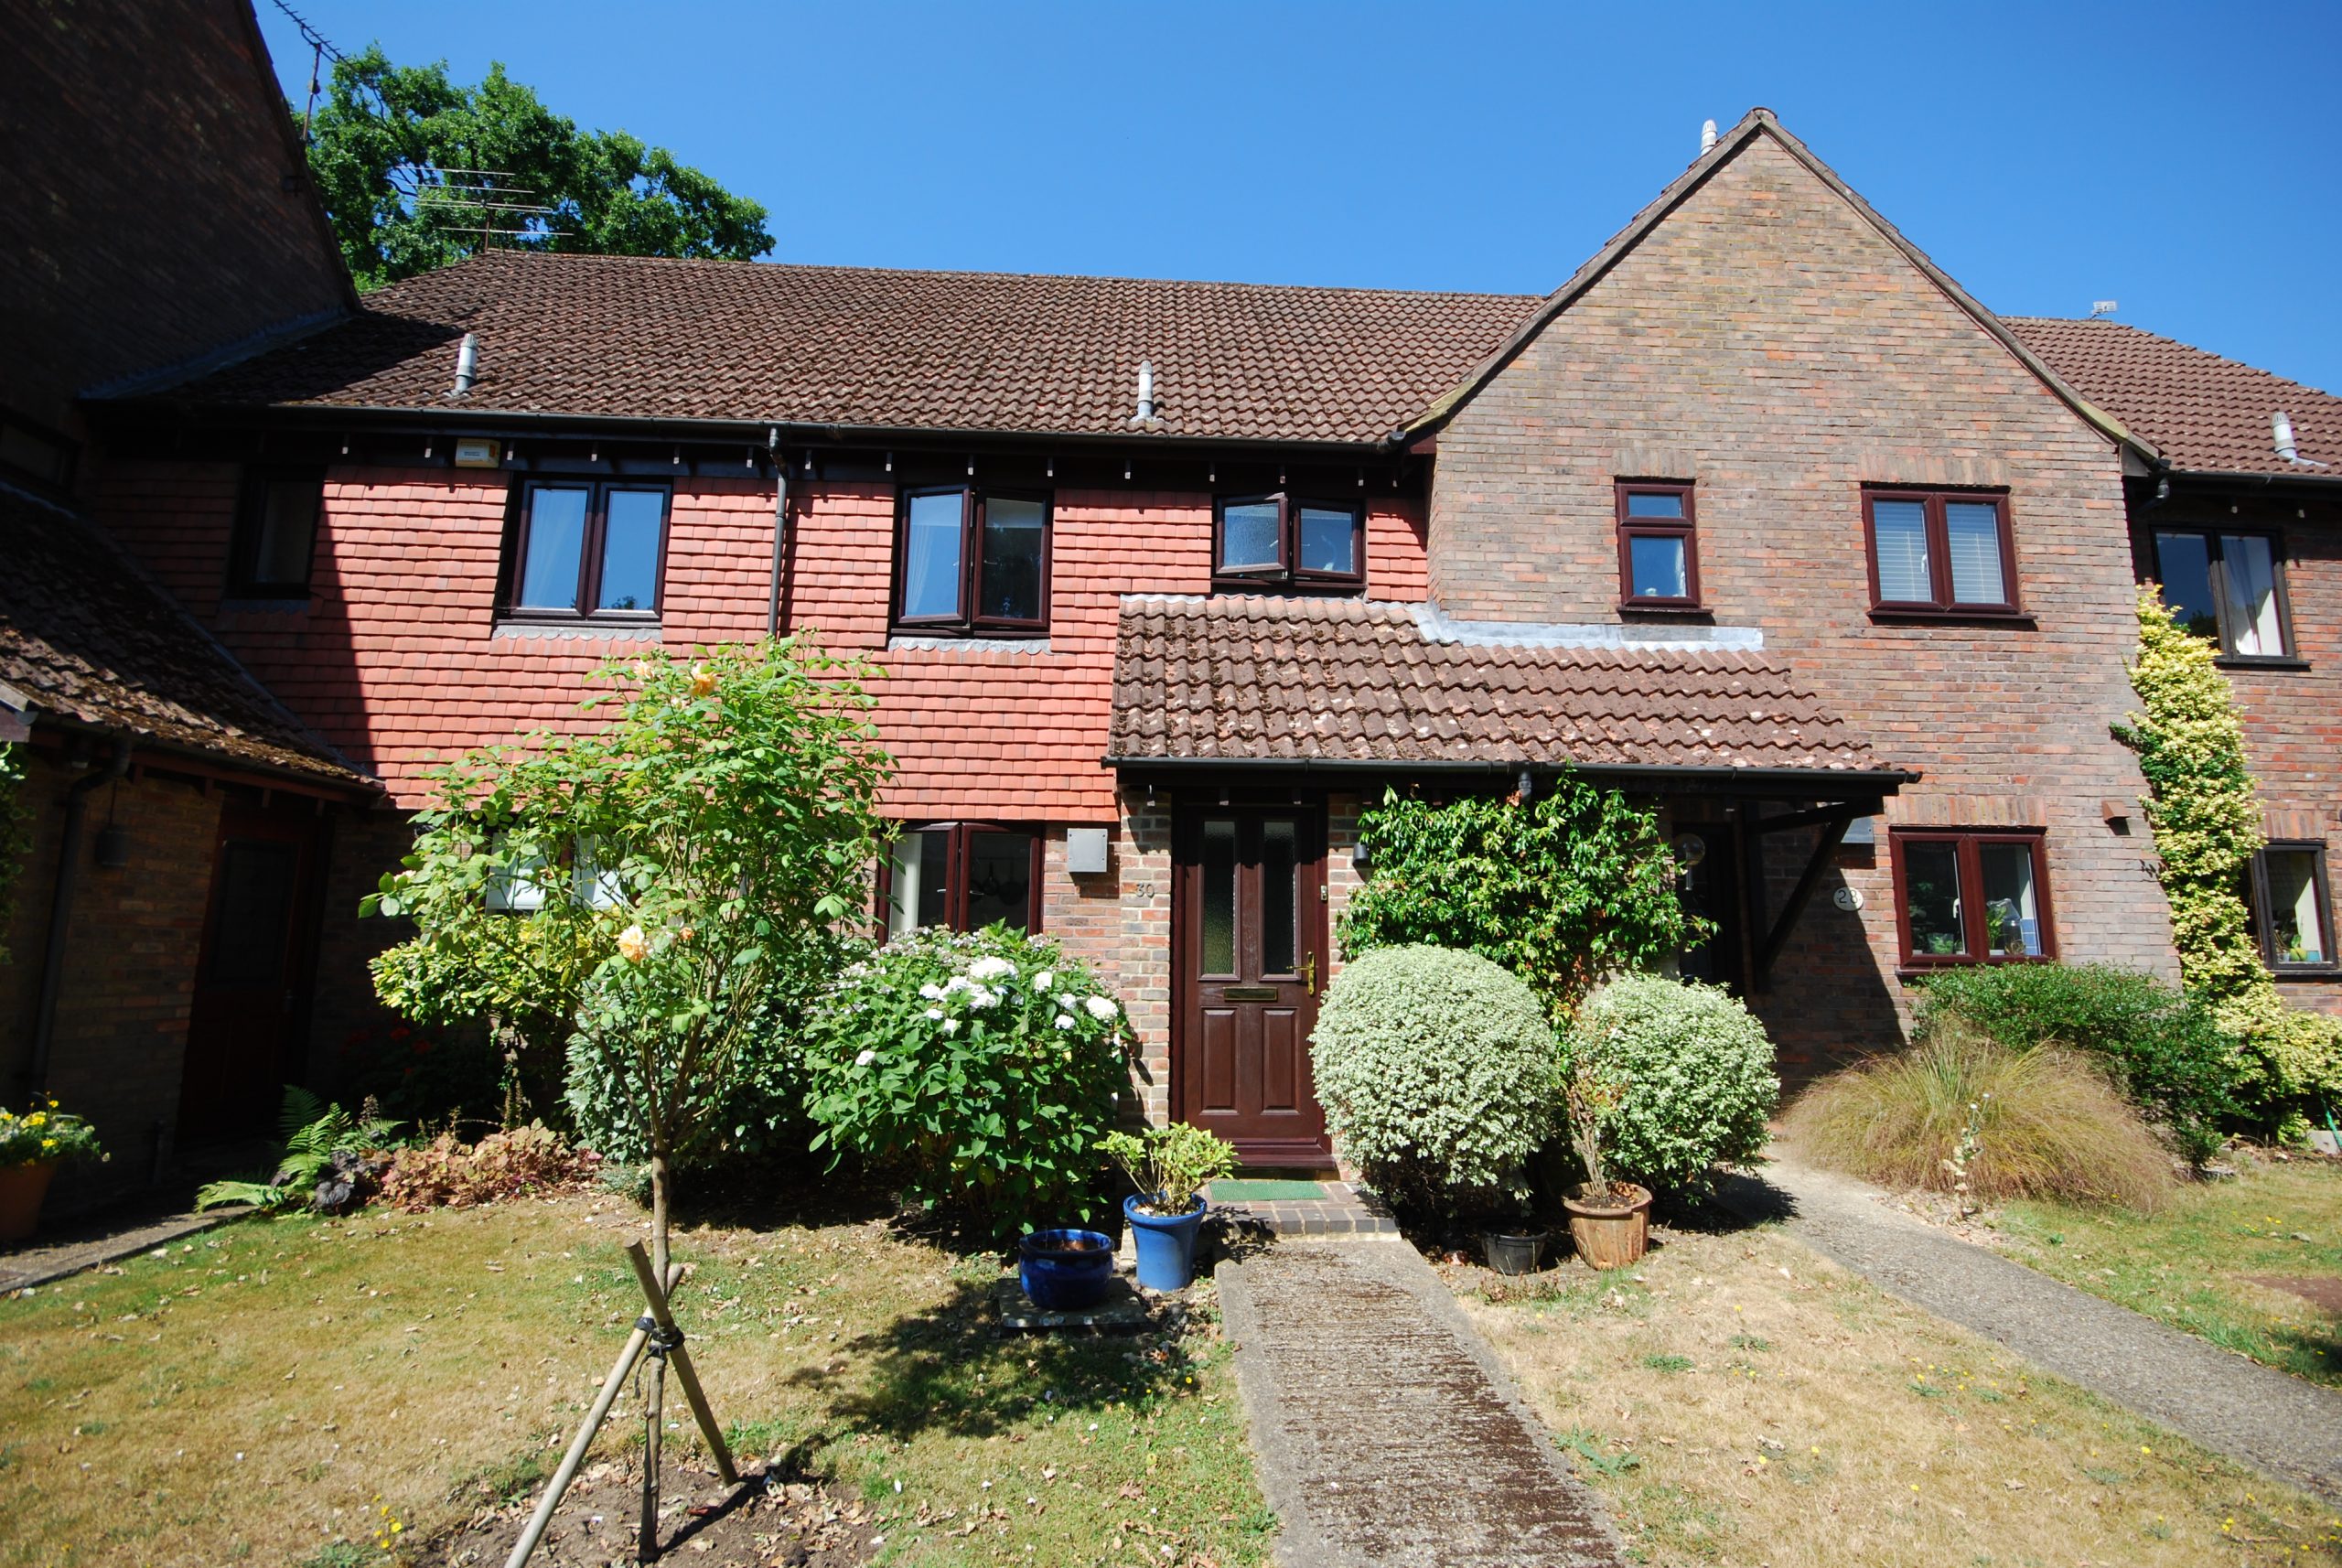 Sale Agreed within 24 hrs – Rowledge, Farnham. Guide £412,500